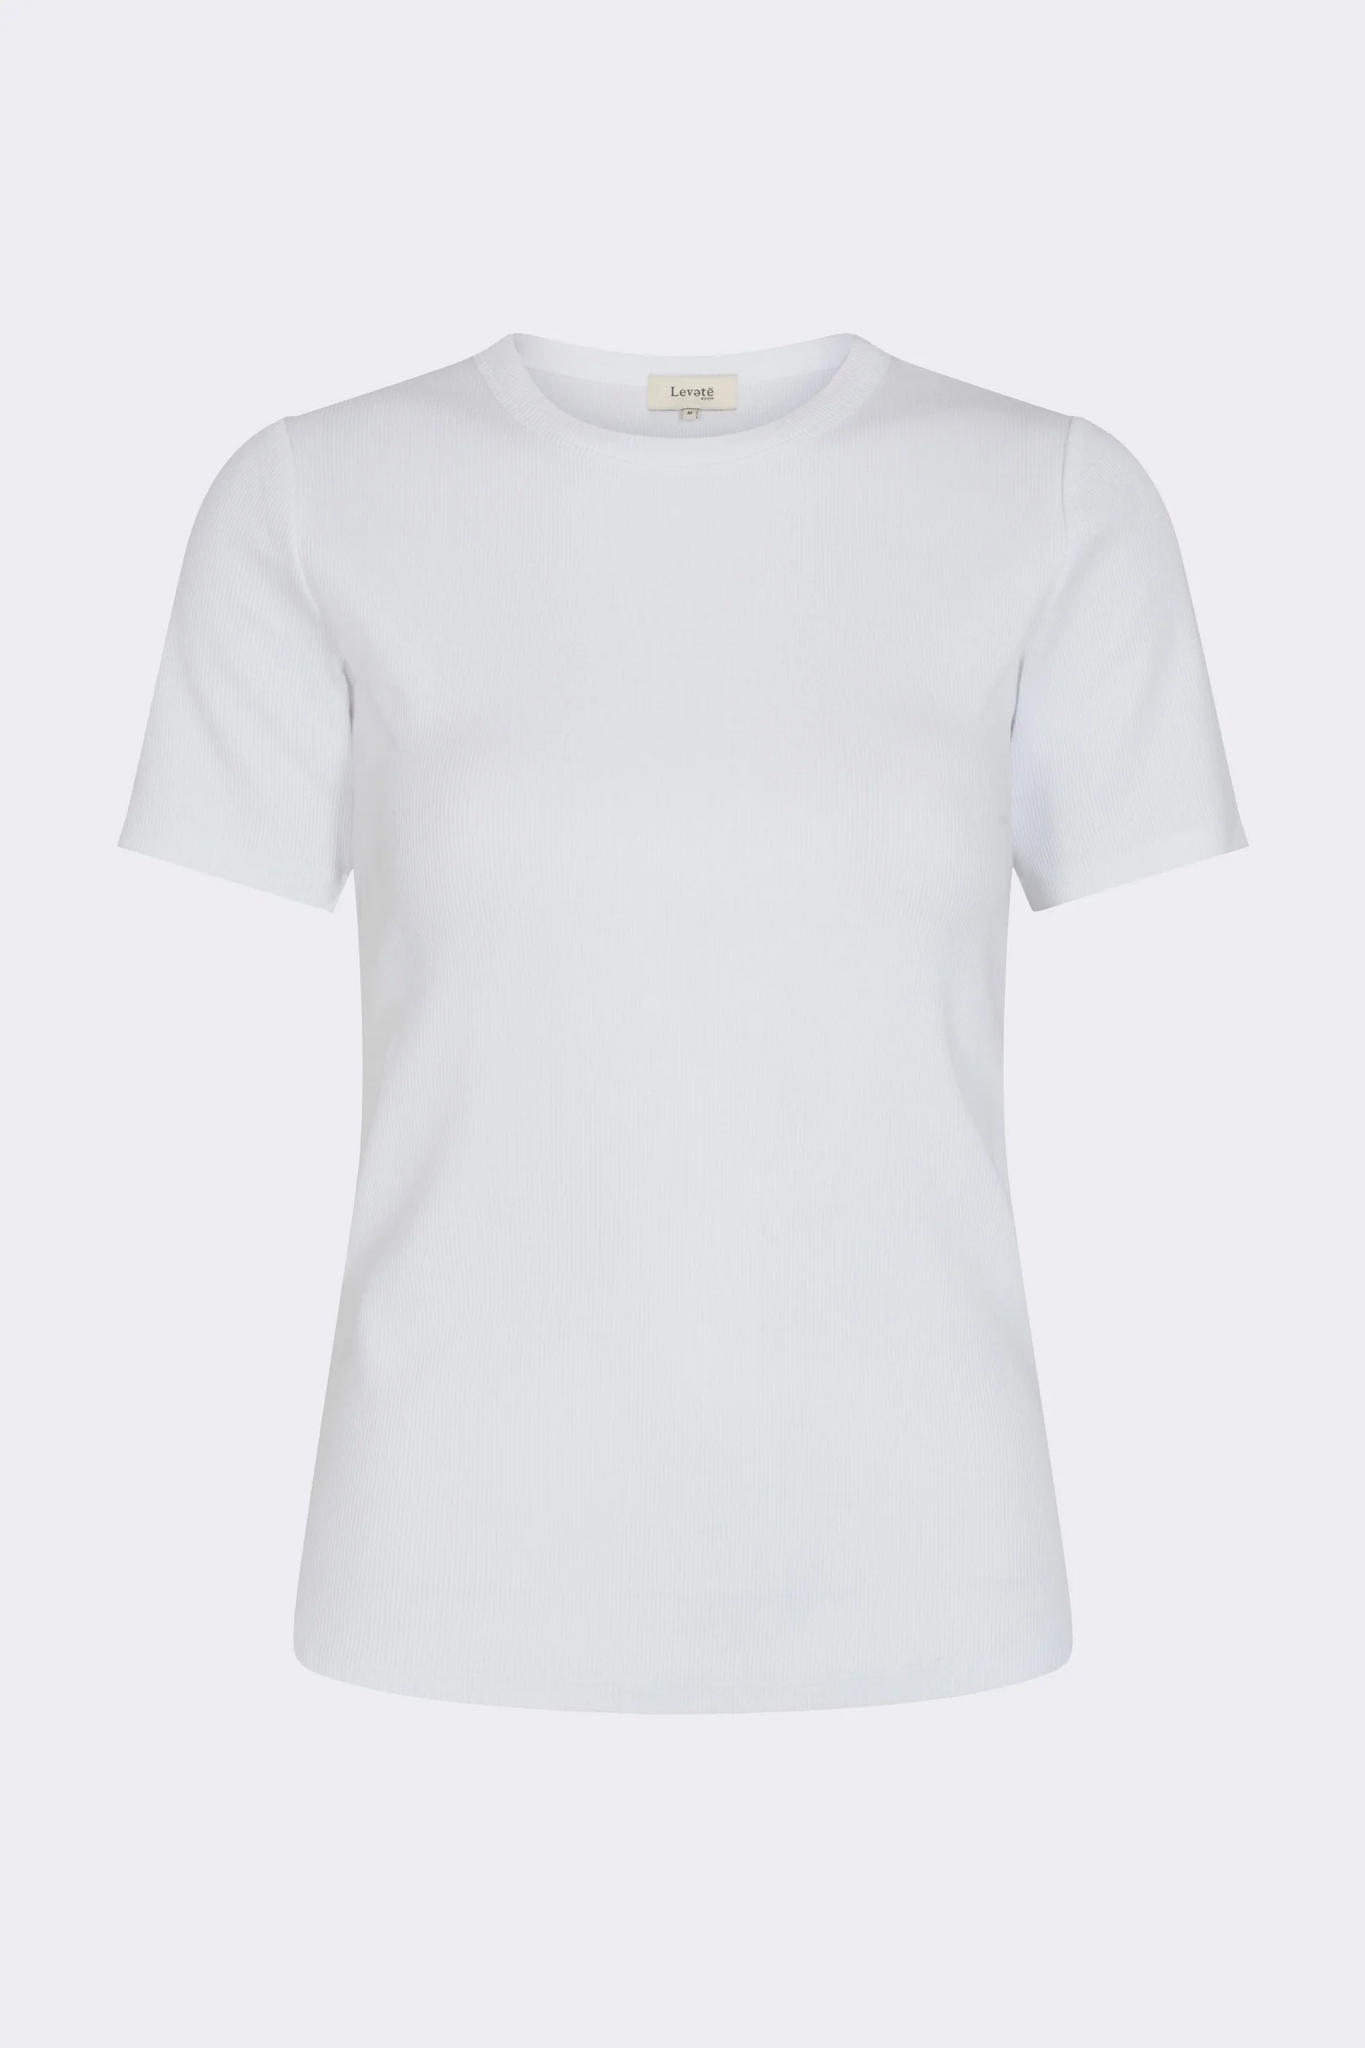 Numbia T-Shirt White Levete